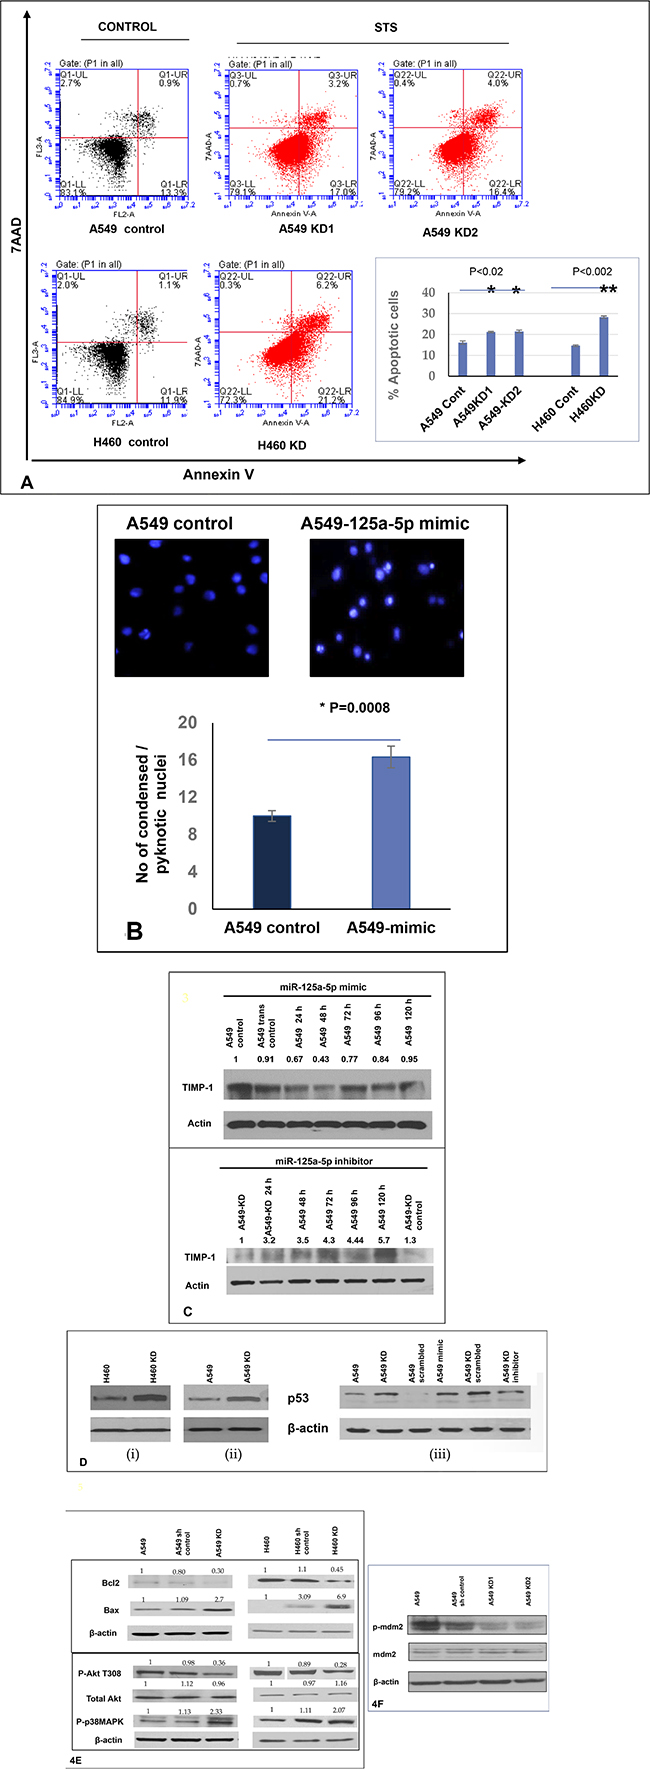 Increased level of miR-125a-5p in TIMP-1 KD clones is associated with induction of apoptosis and directly targets TIMP-1.